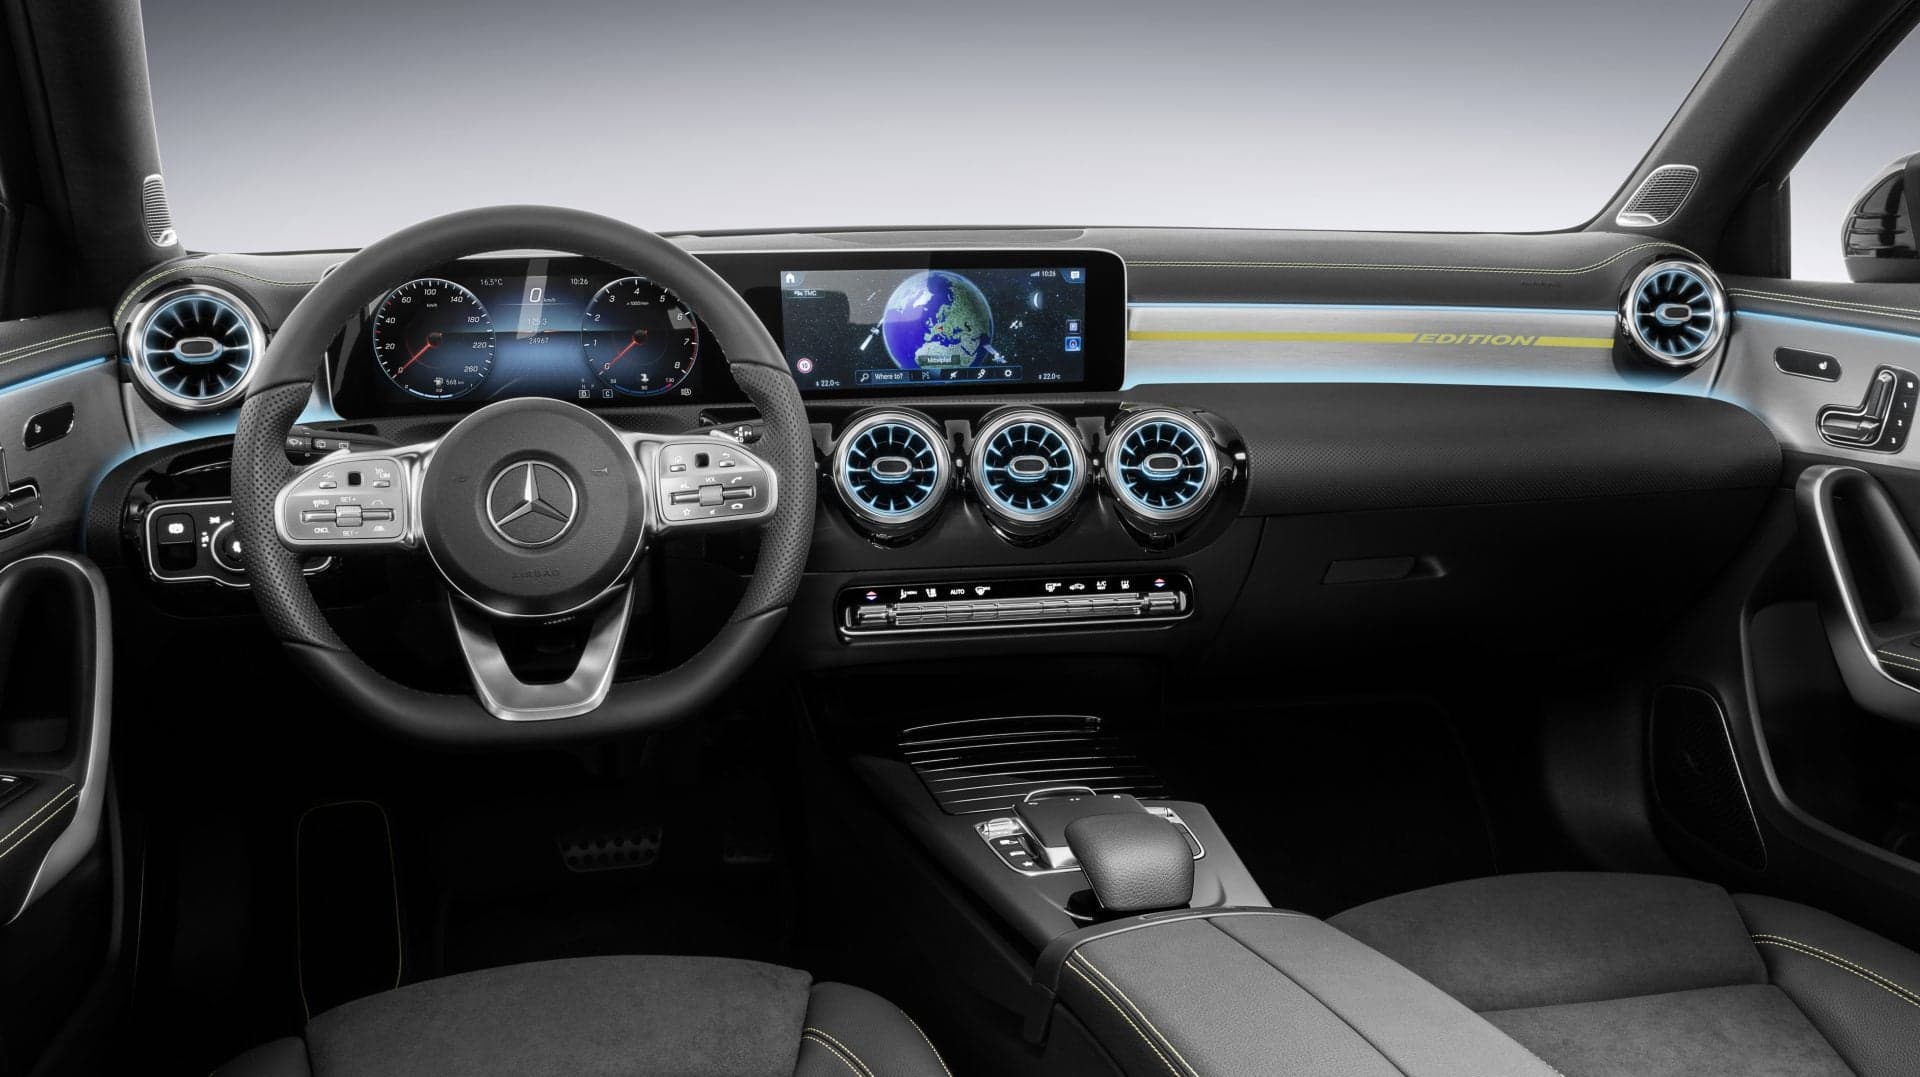 Take a Look at the Swanky Interior on the Next Mercedes-Benz A-Class